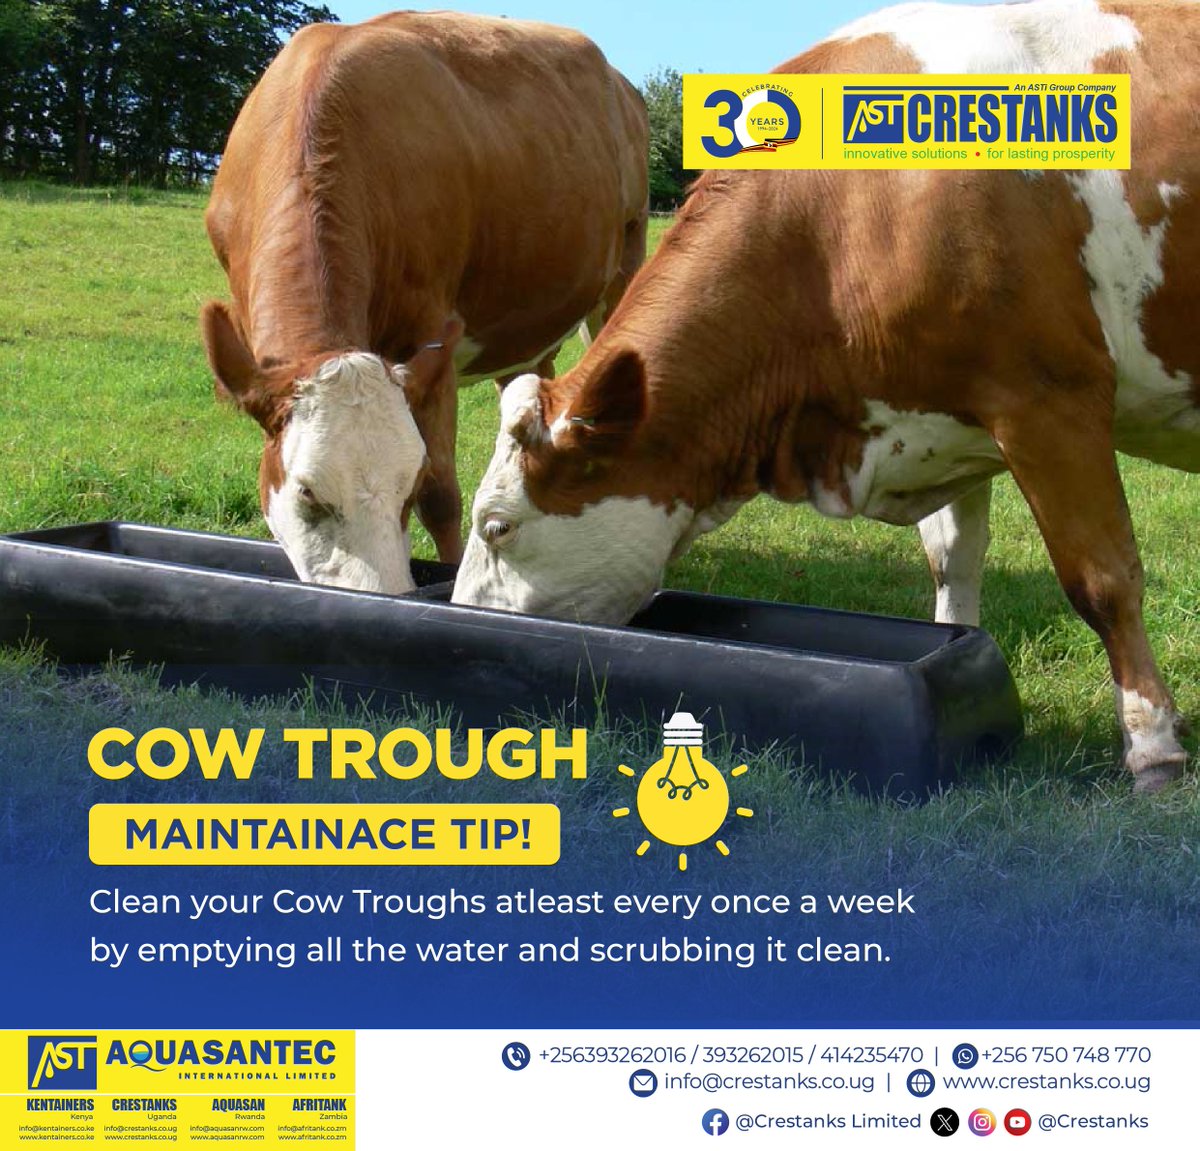 Keep your cattle healthy and disease free by frequently emptying & scrubbing the cow trough. Algae and other organisms could take hold in a dirty trough & cause damage to your animals. 

#Crestanks #CowTroughs #Maintenancetips